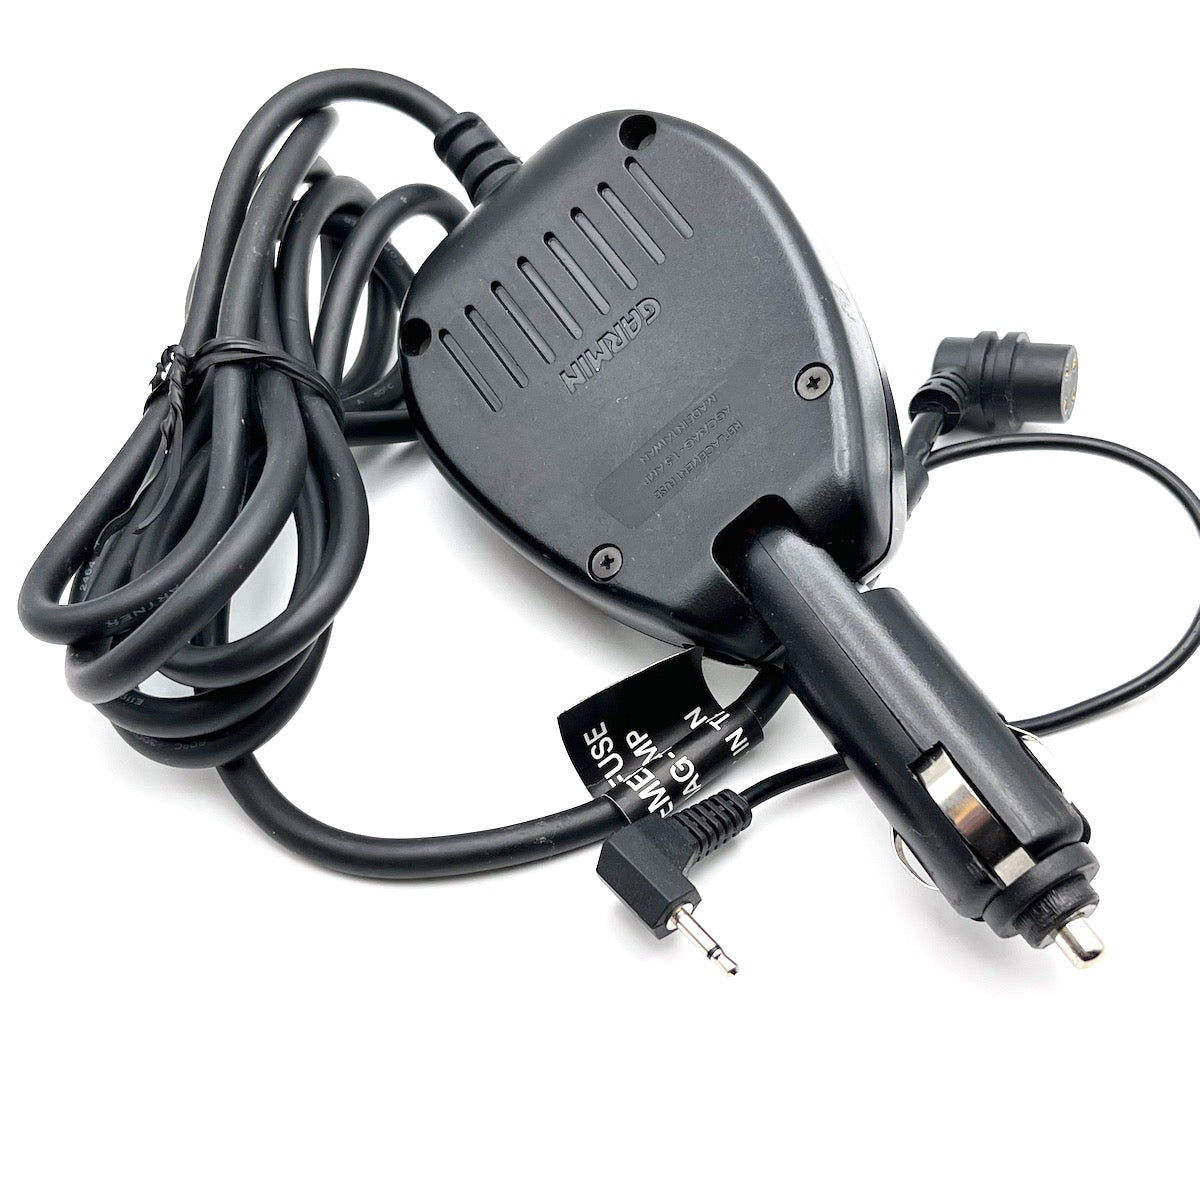 Vehicle Power Cable with speaker for Garmin GPSMAP 295 Streetpilot III